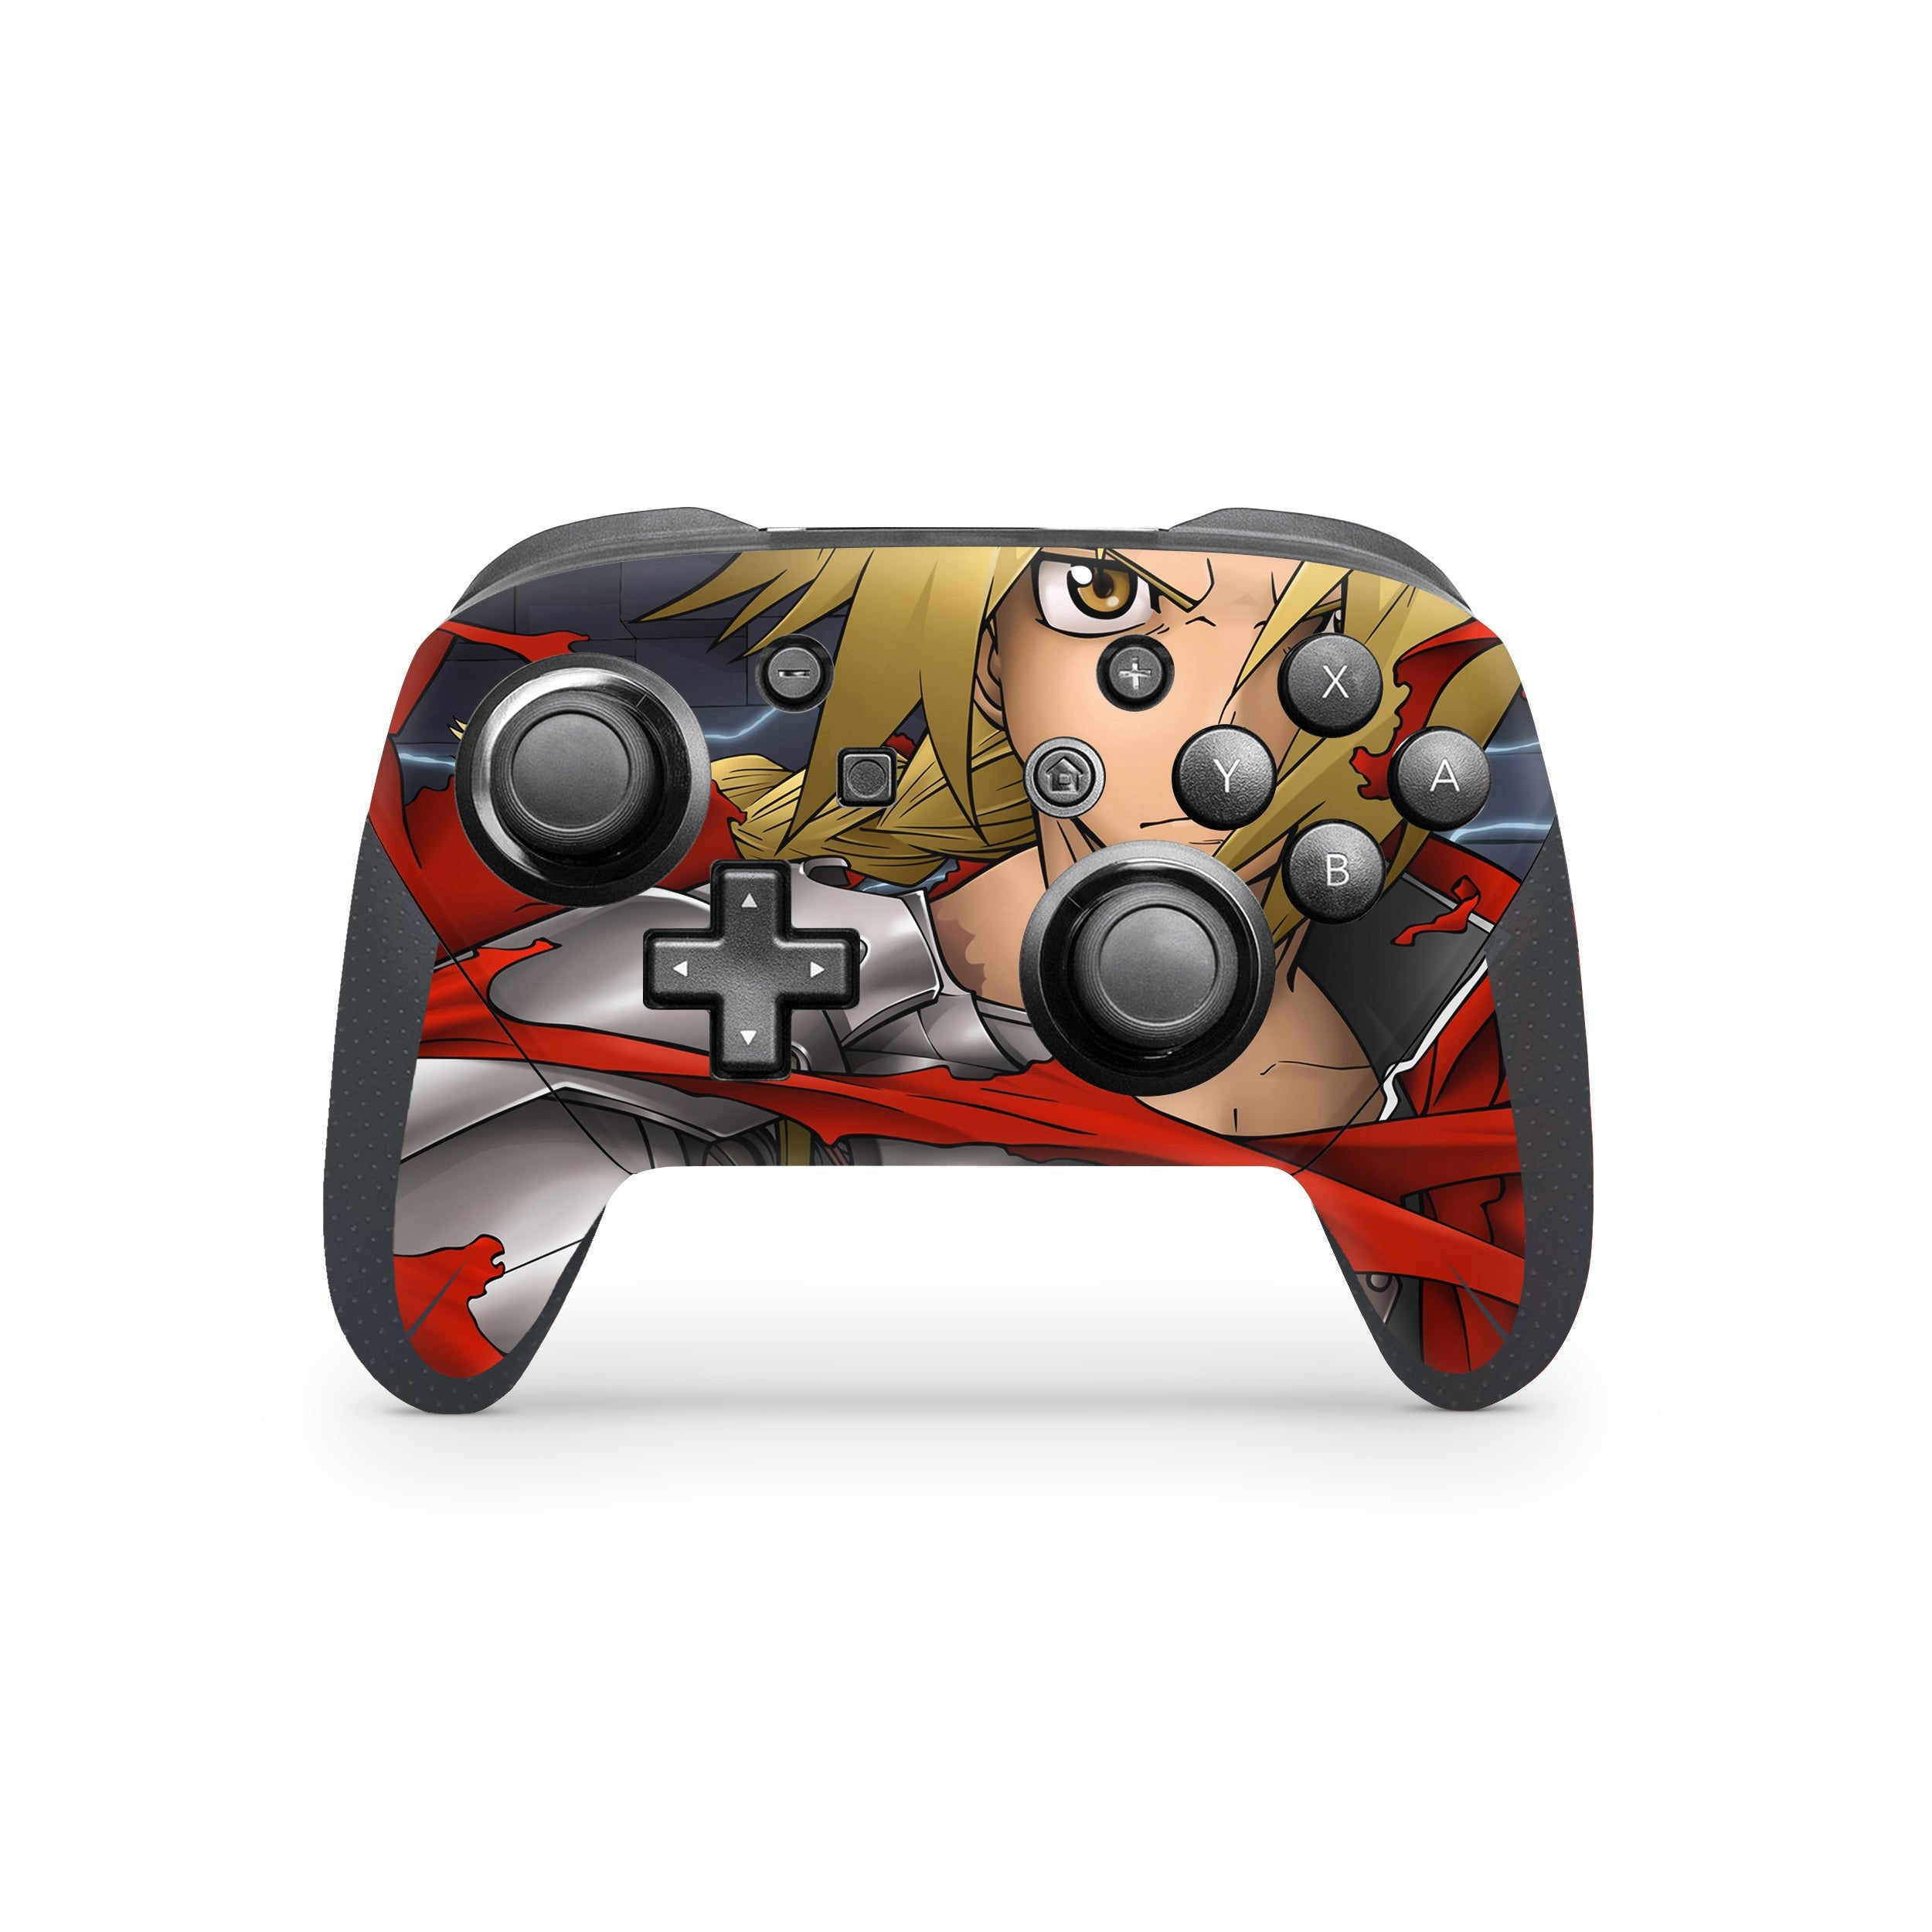 A video game skin featuring a Fullmetal Alchemist Edward Elric design for the Switch Pro Controller.